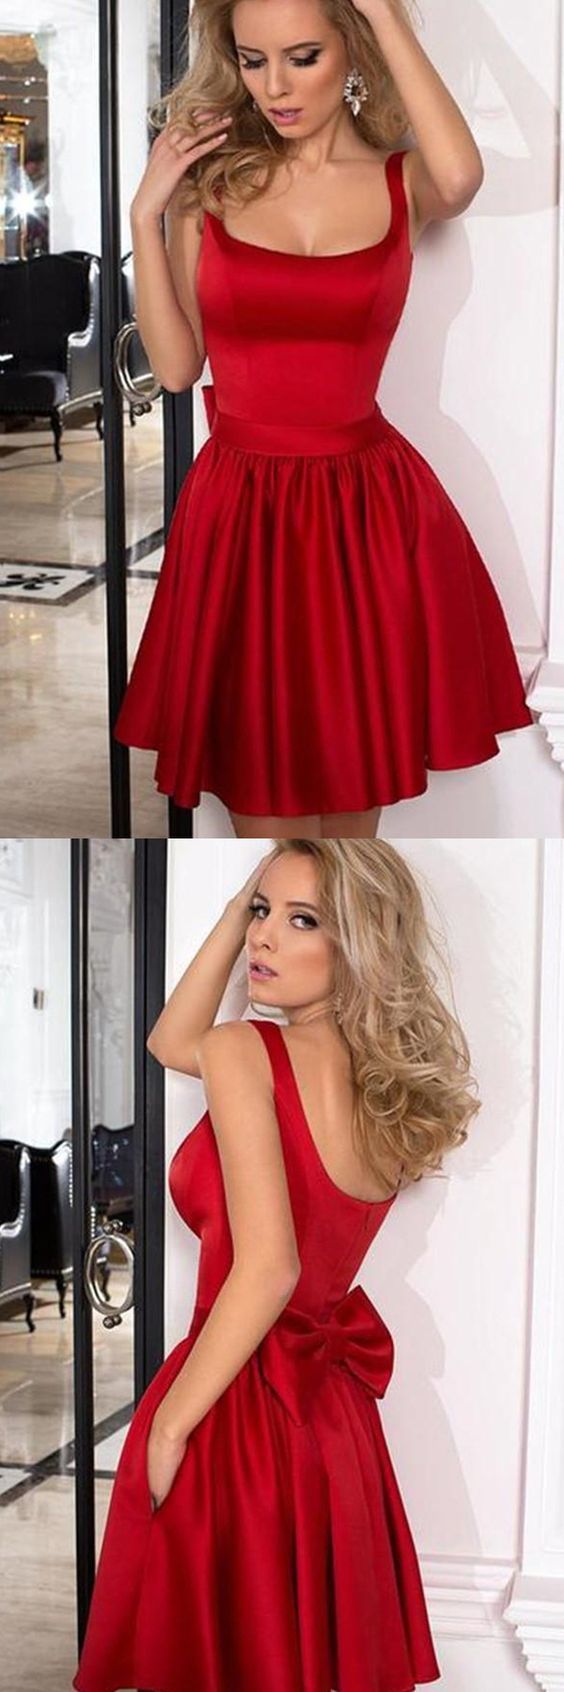 Fashion Straps Red Cute A Line Homecoming Dress cg241